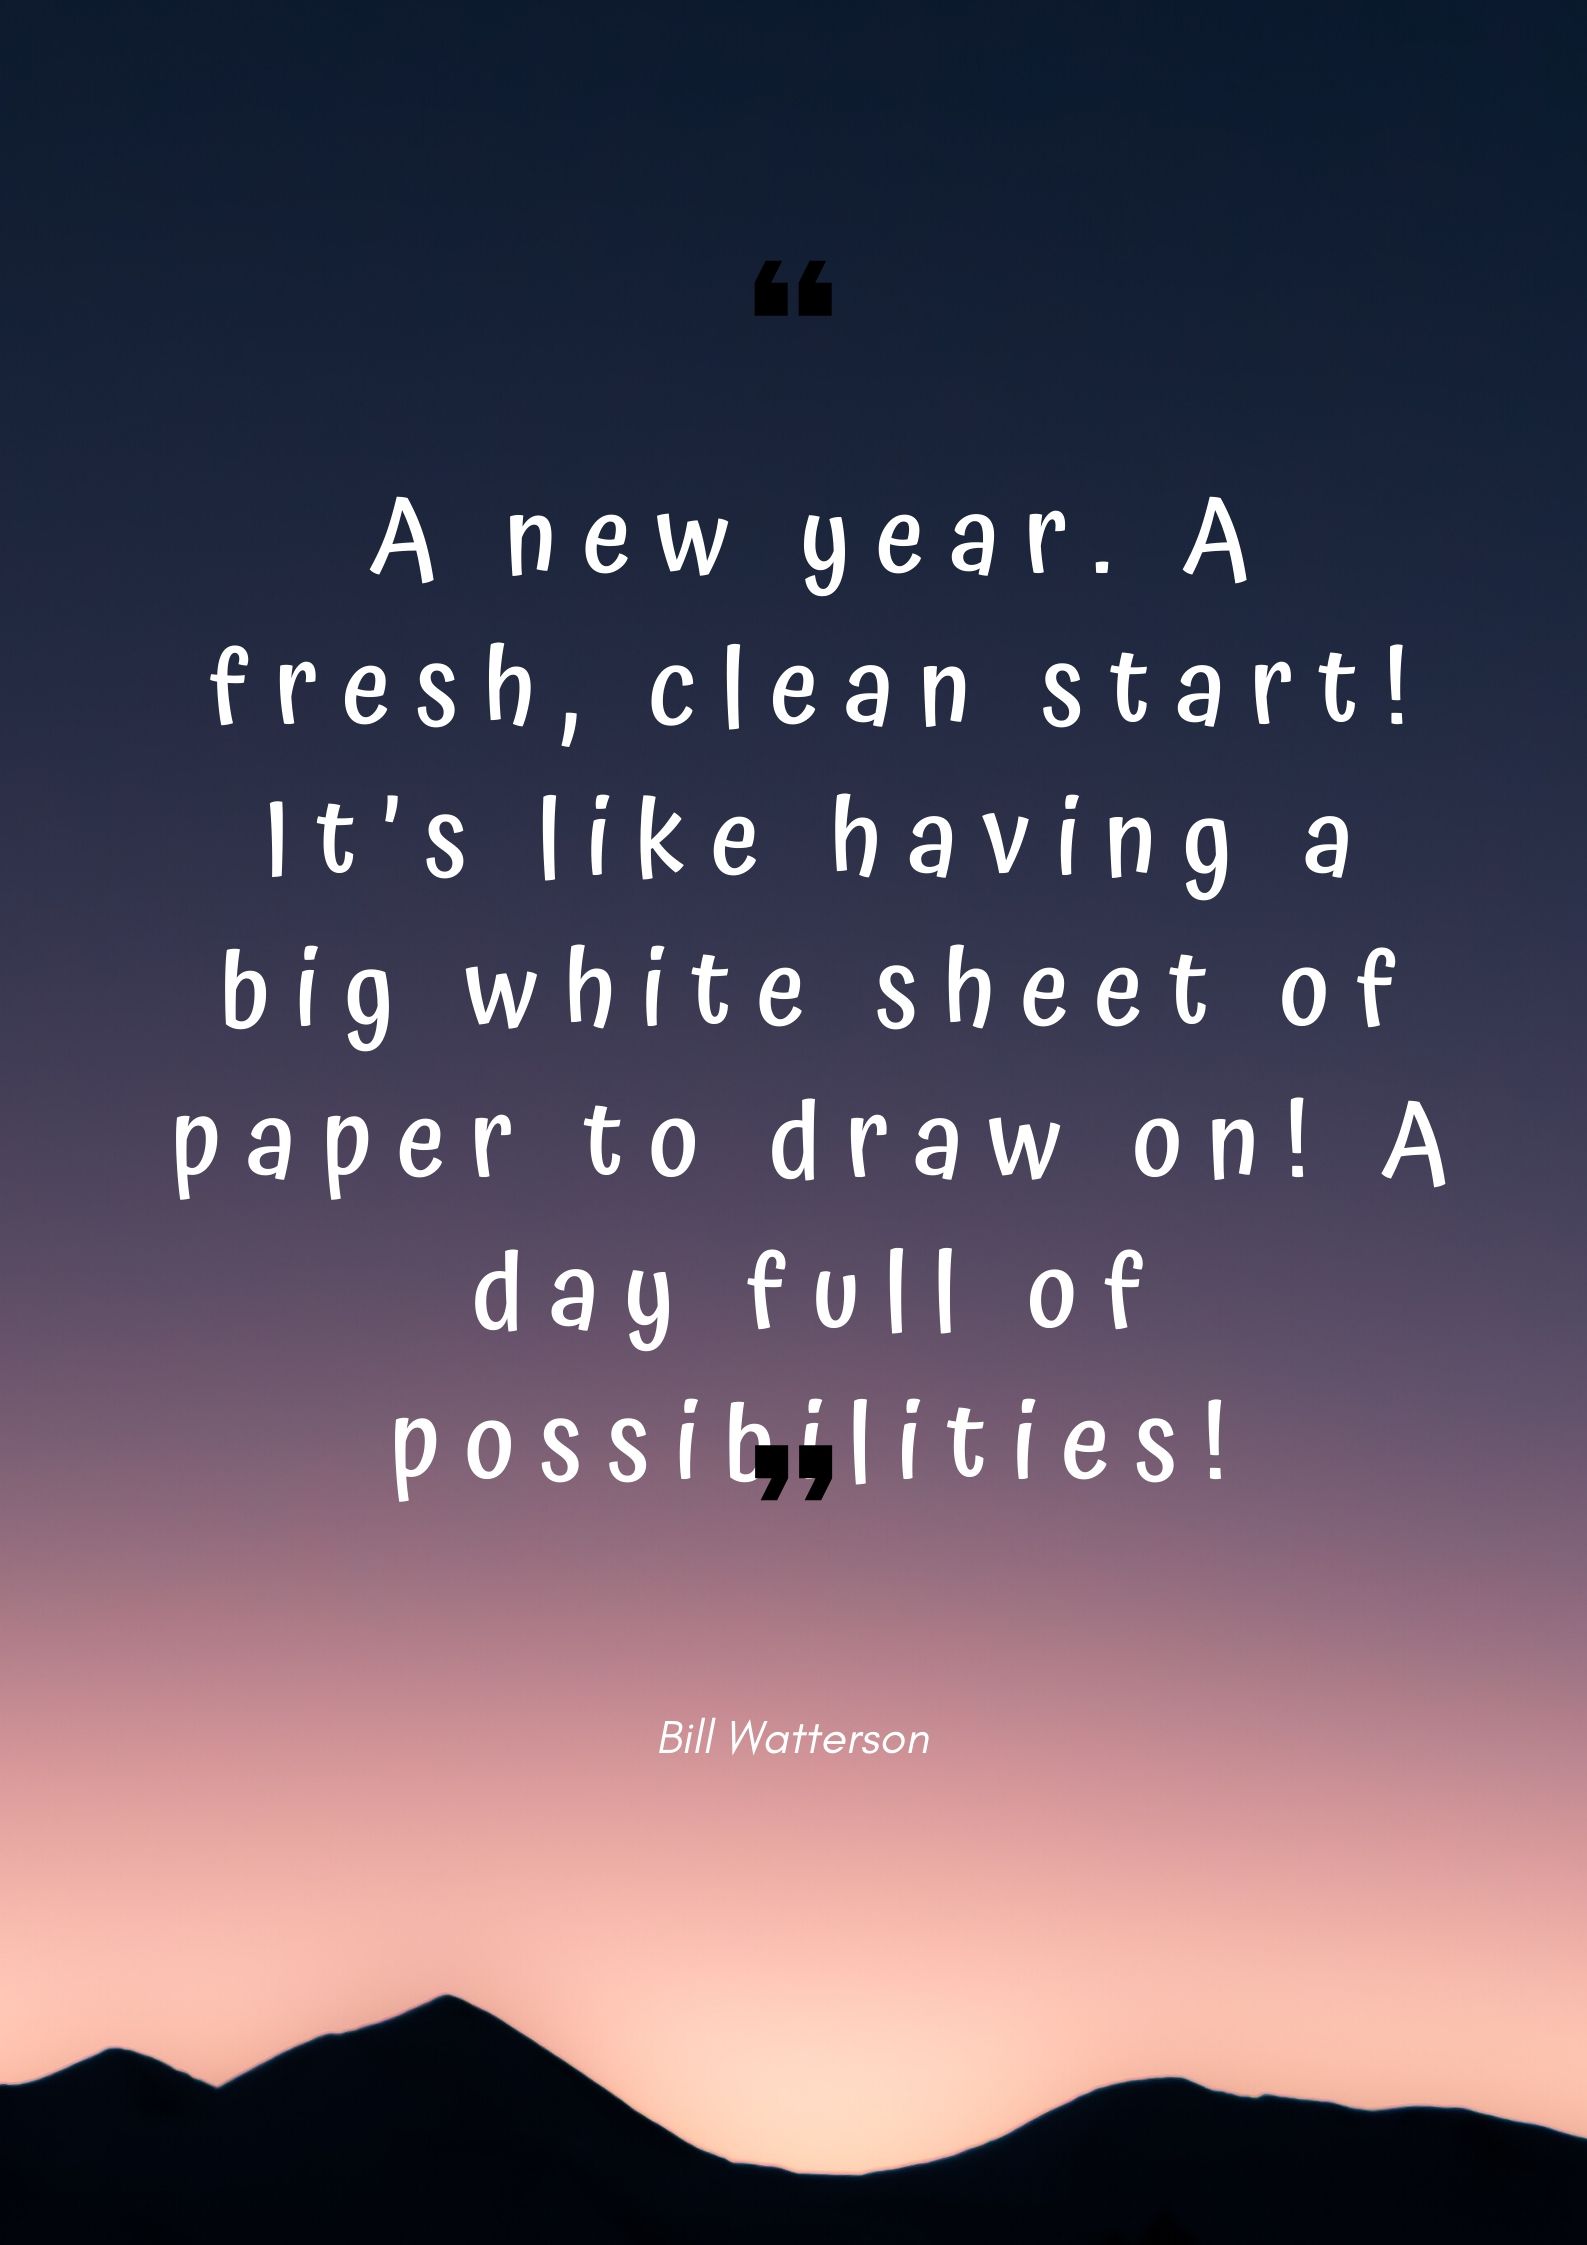 A new year. A fresh, clean start! It’s like having a big white sheet of paper to draw on! A day full of possibilities!